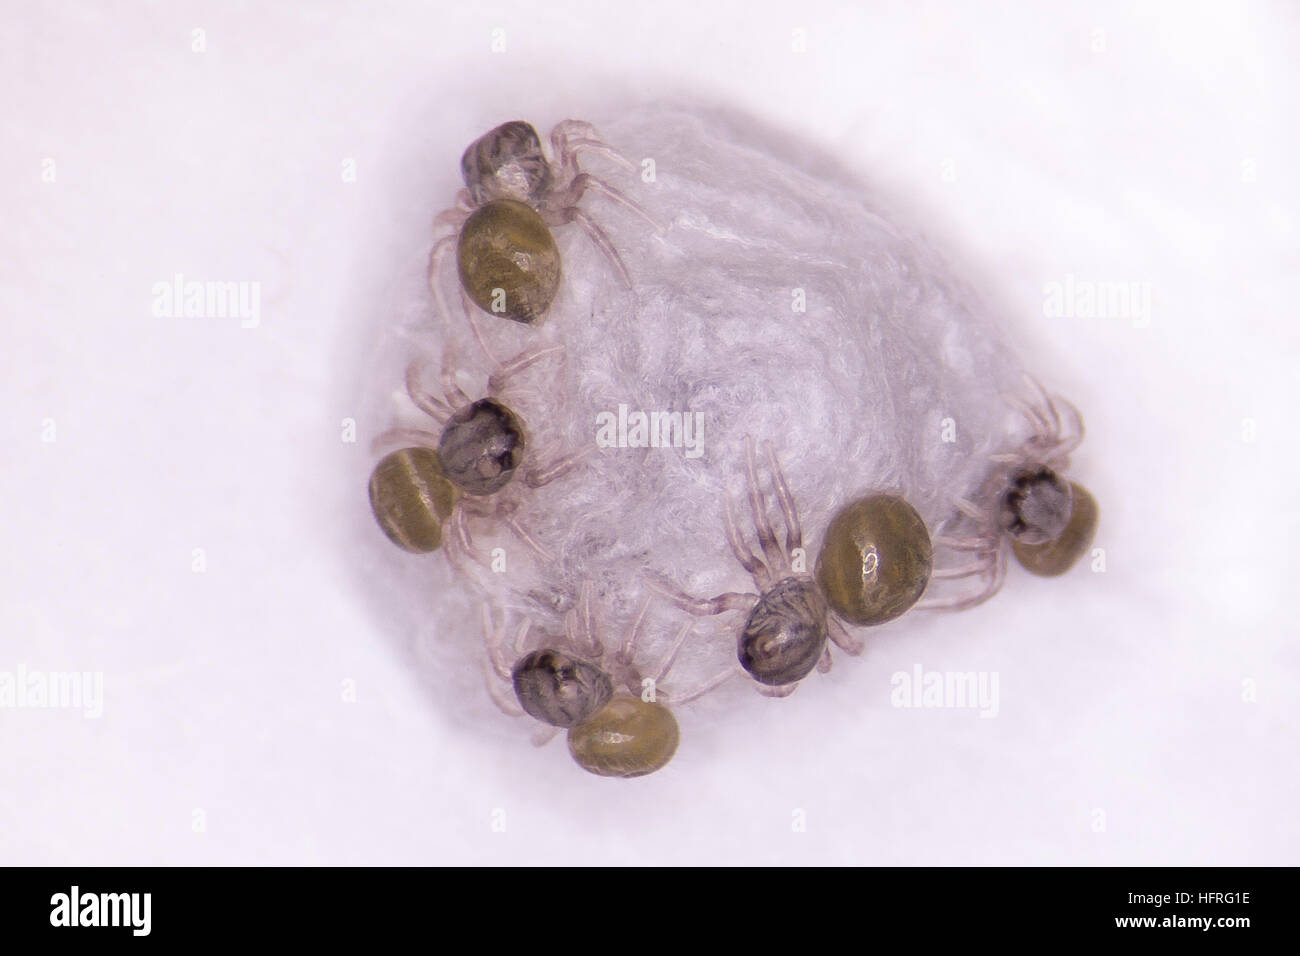 Habronattus oregonensis hatchlings, still clinging to the surface of the egg sac. Photographed on a white background. Stock Photo